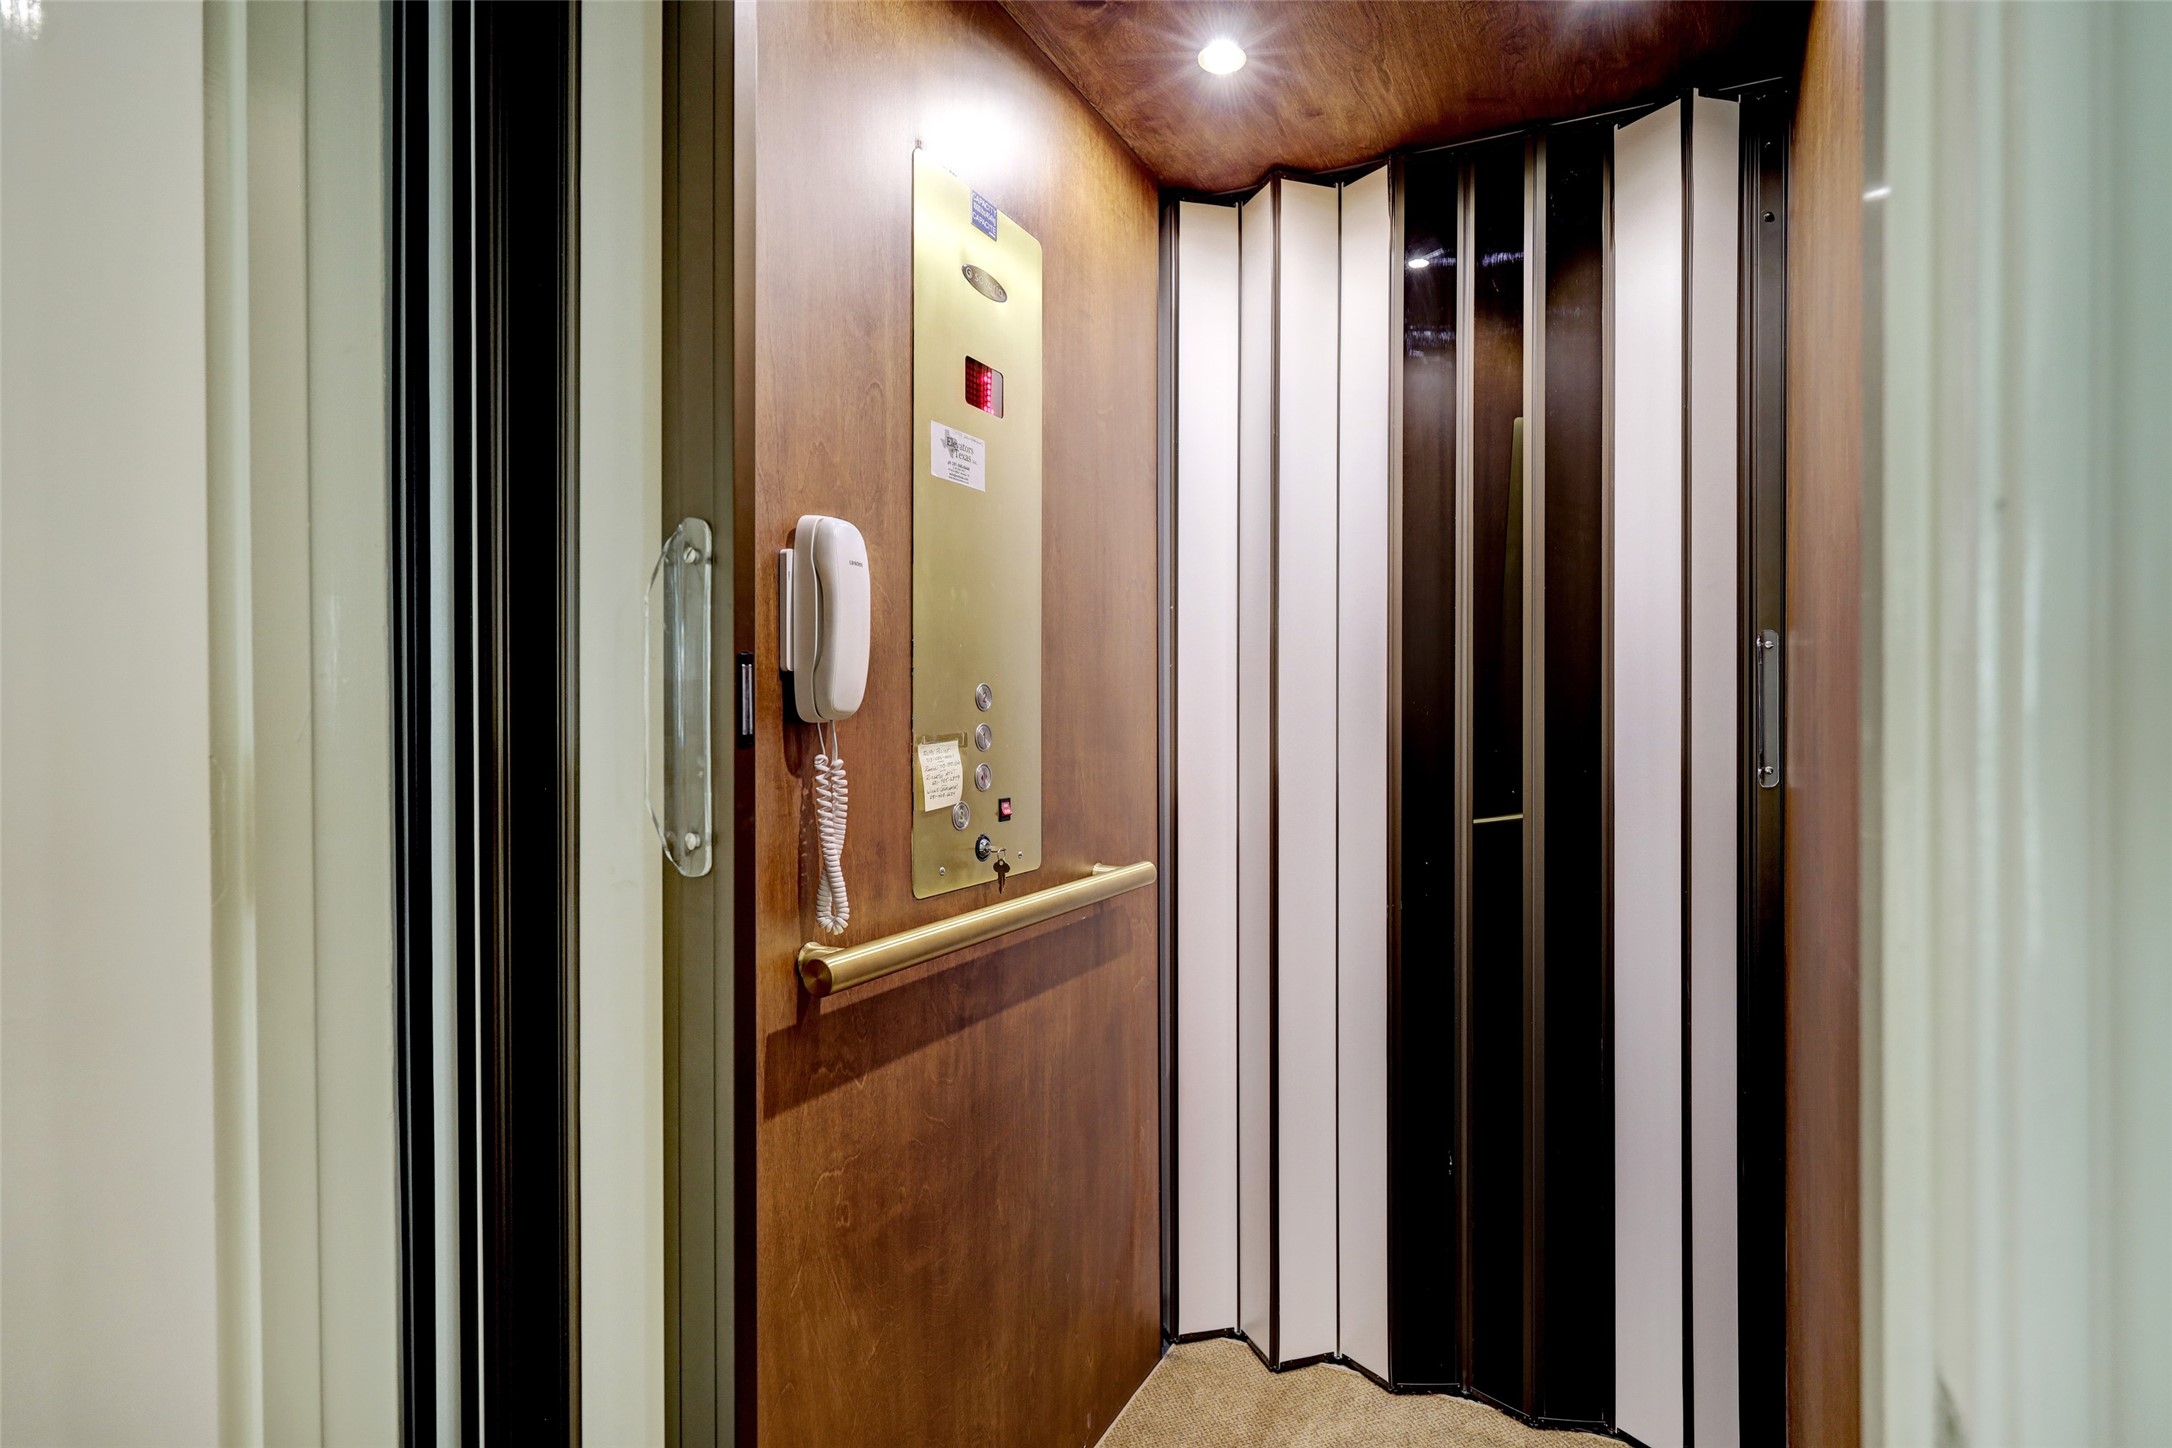 Nestled discreetly off the kitchen, a handsome elevator adds convenience and accessibility to the home's design.